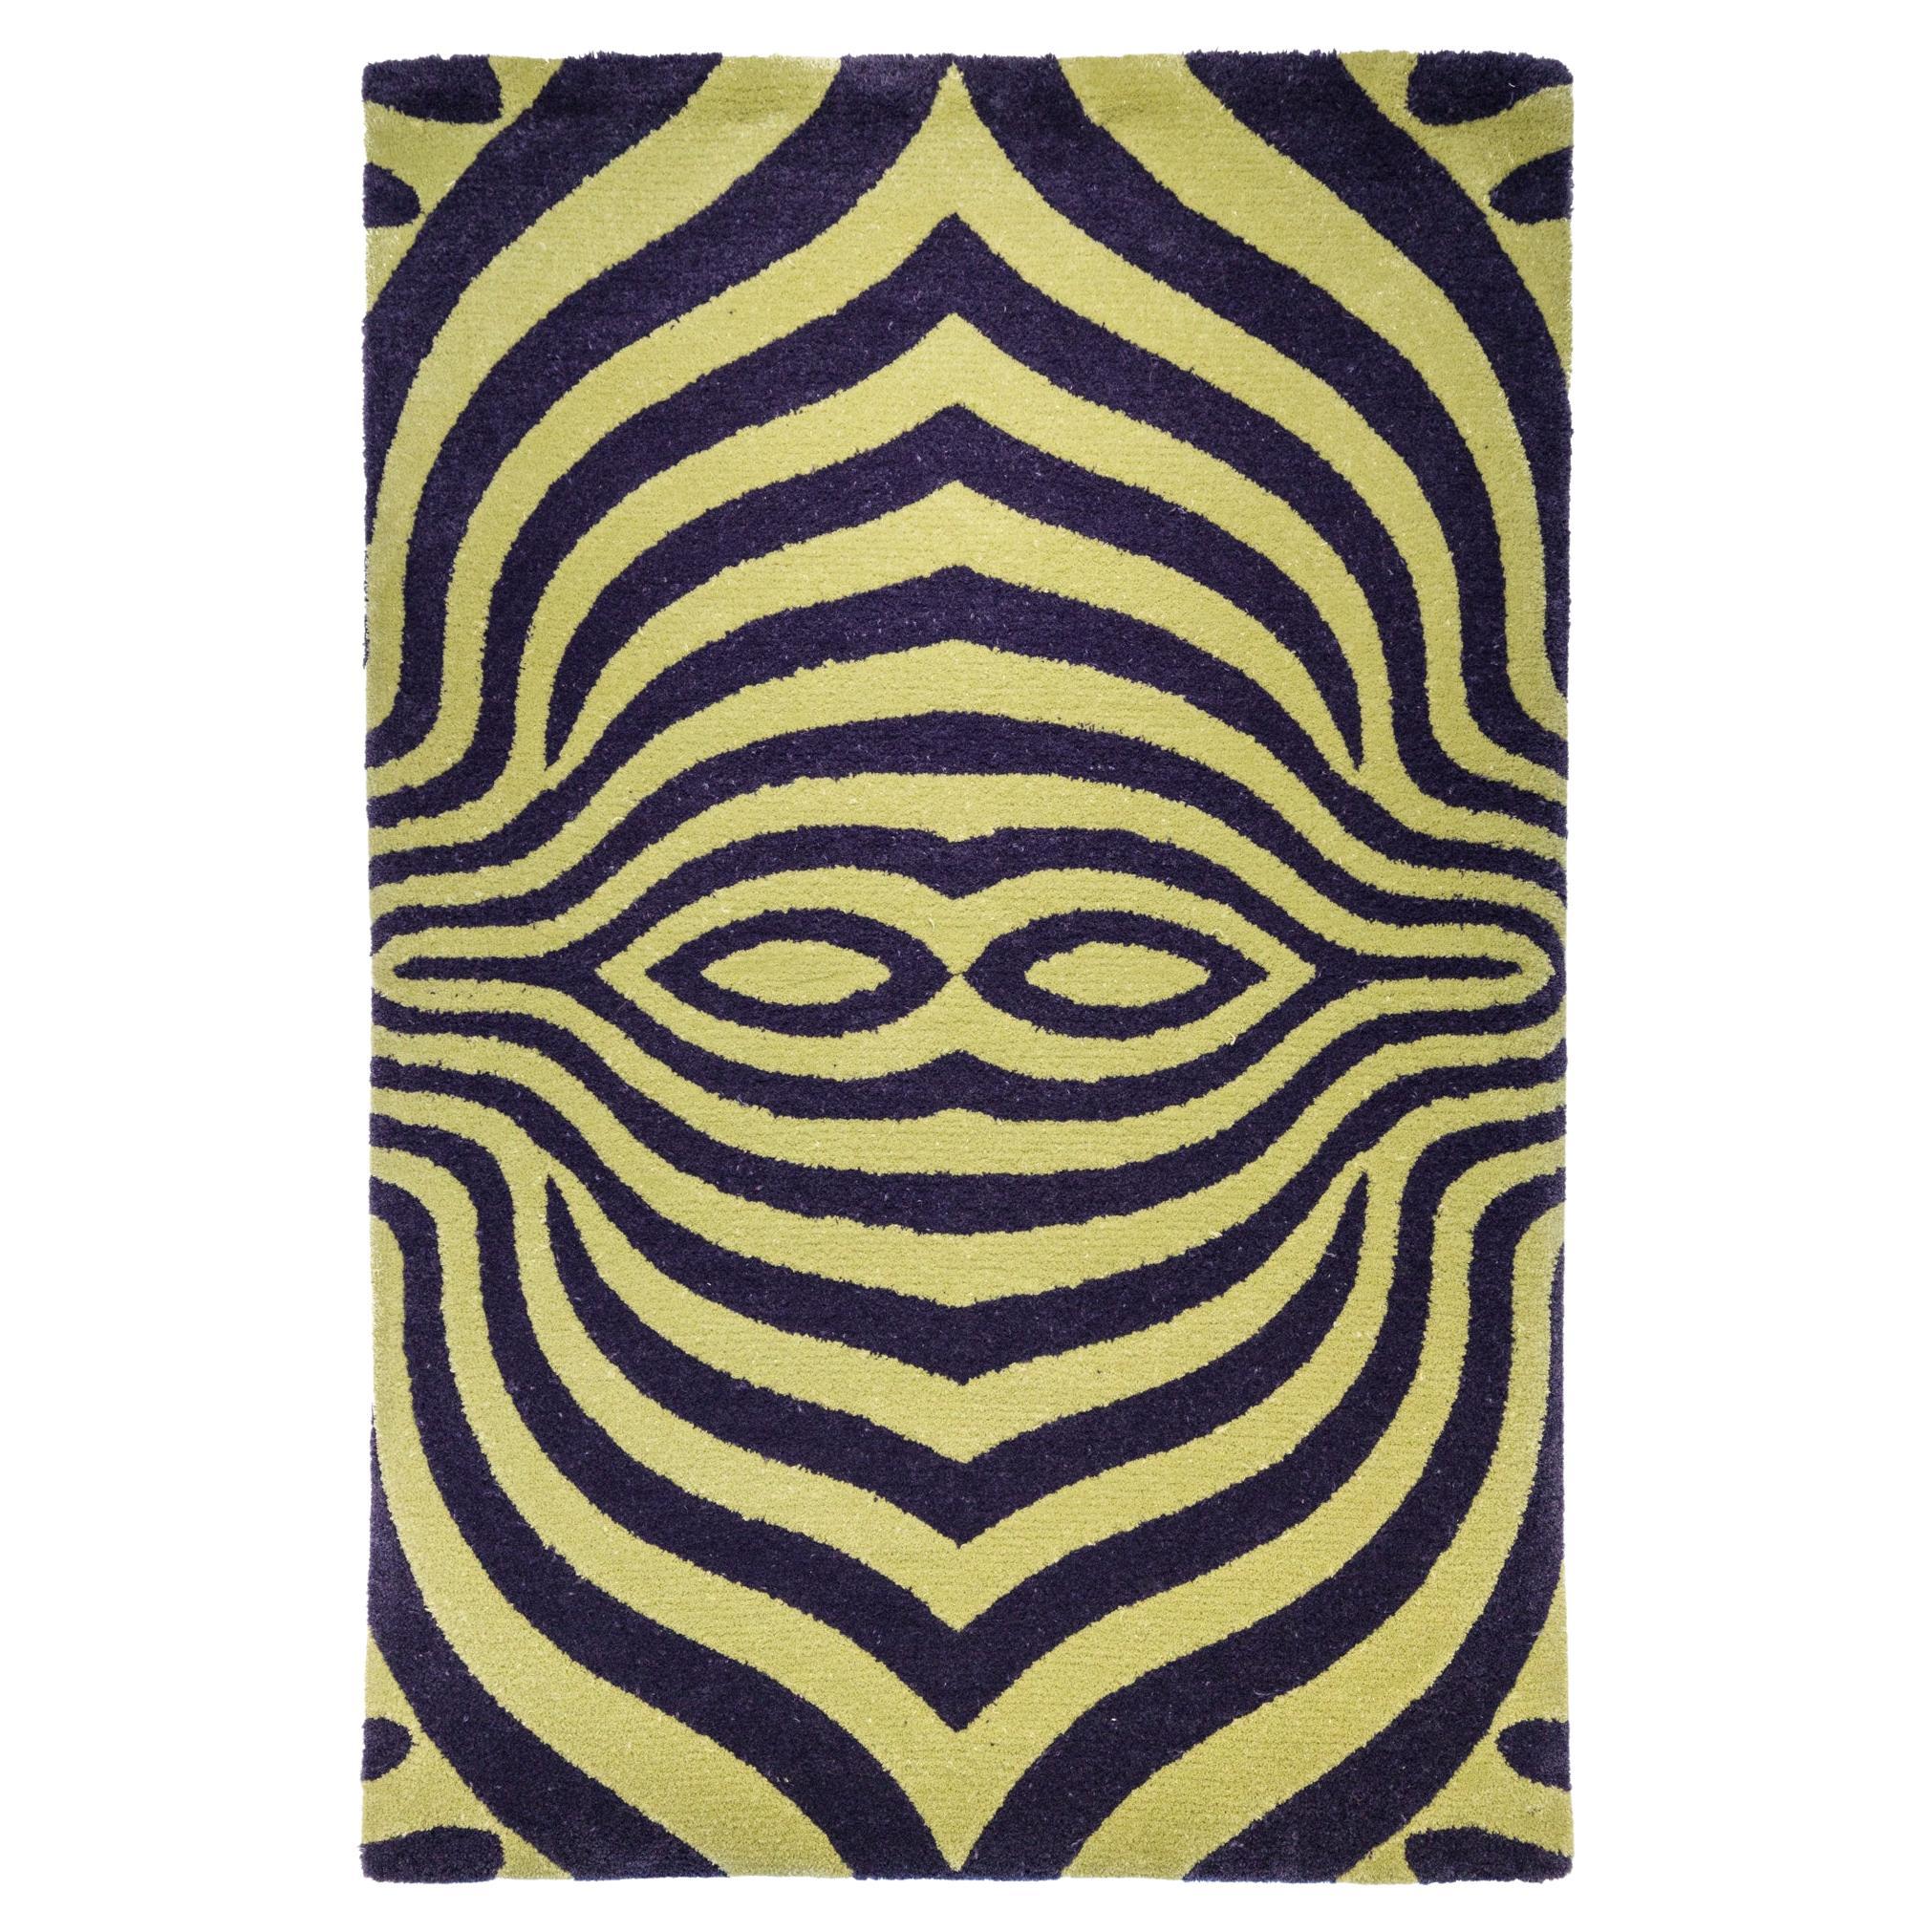 Symmetrical Hanging Tapestry, Tufted New Zealand Wool For Sale